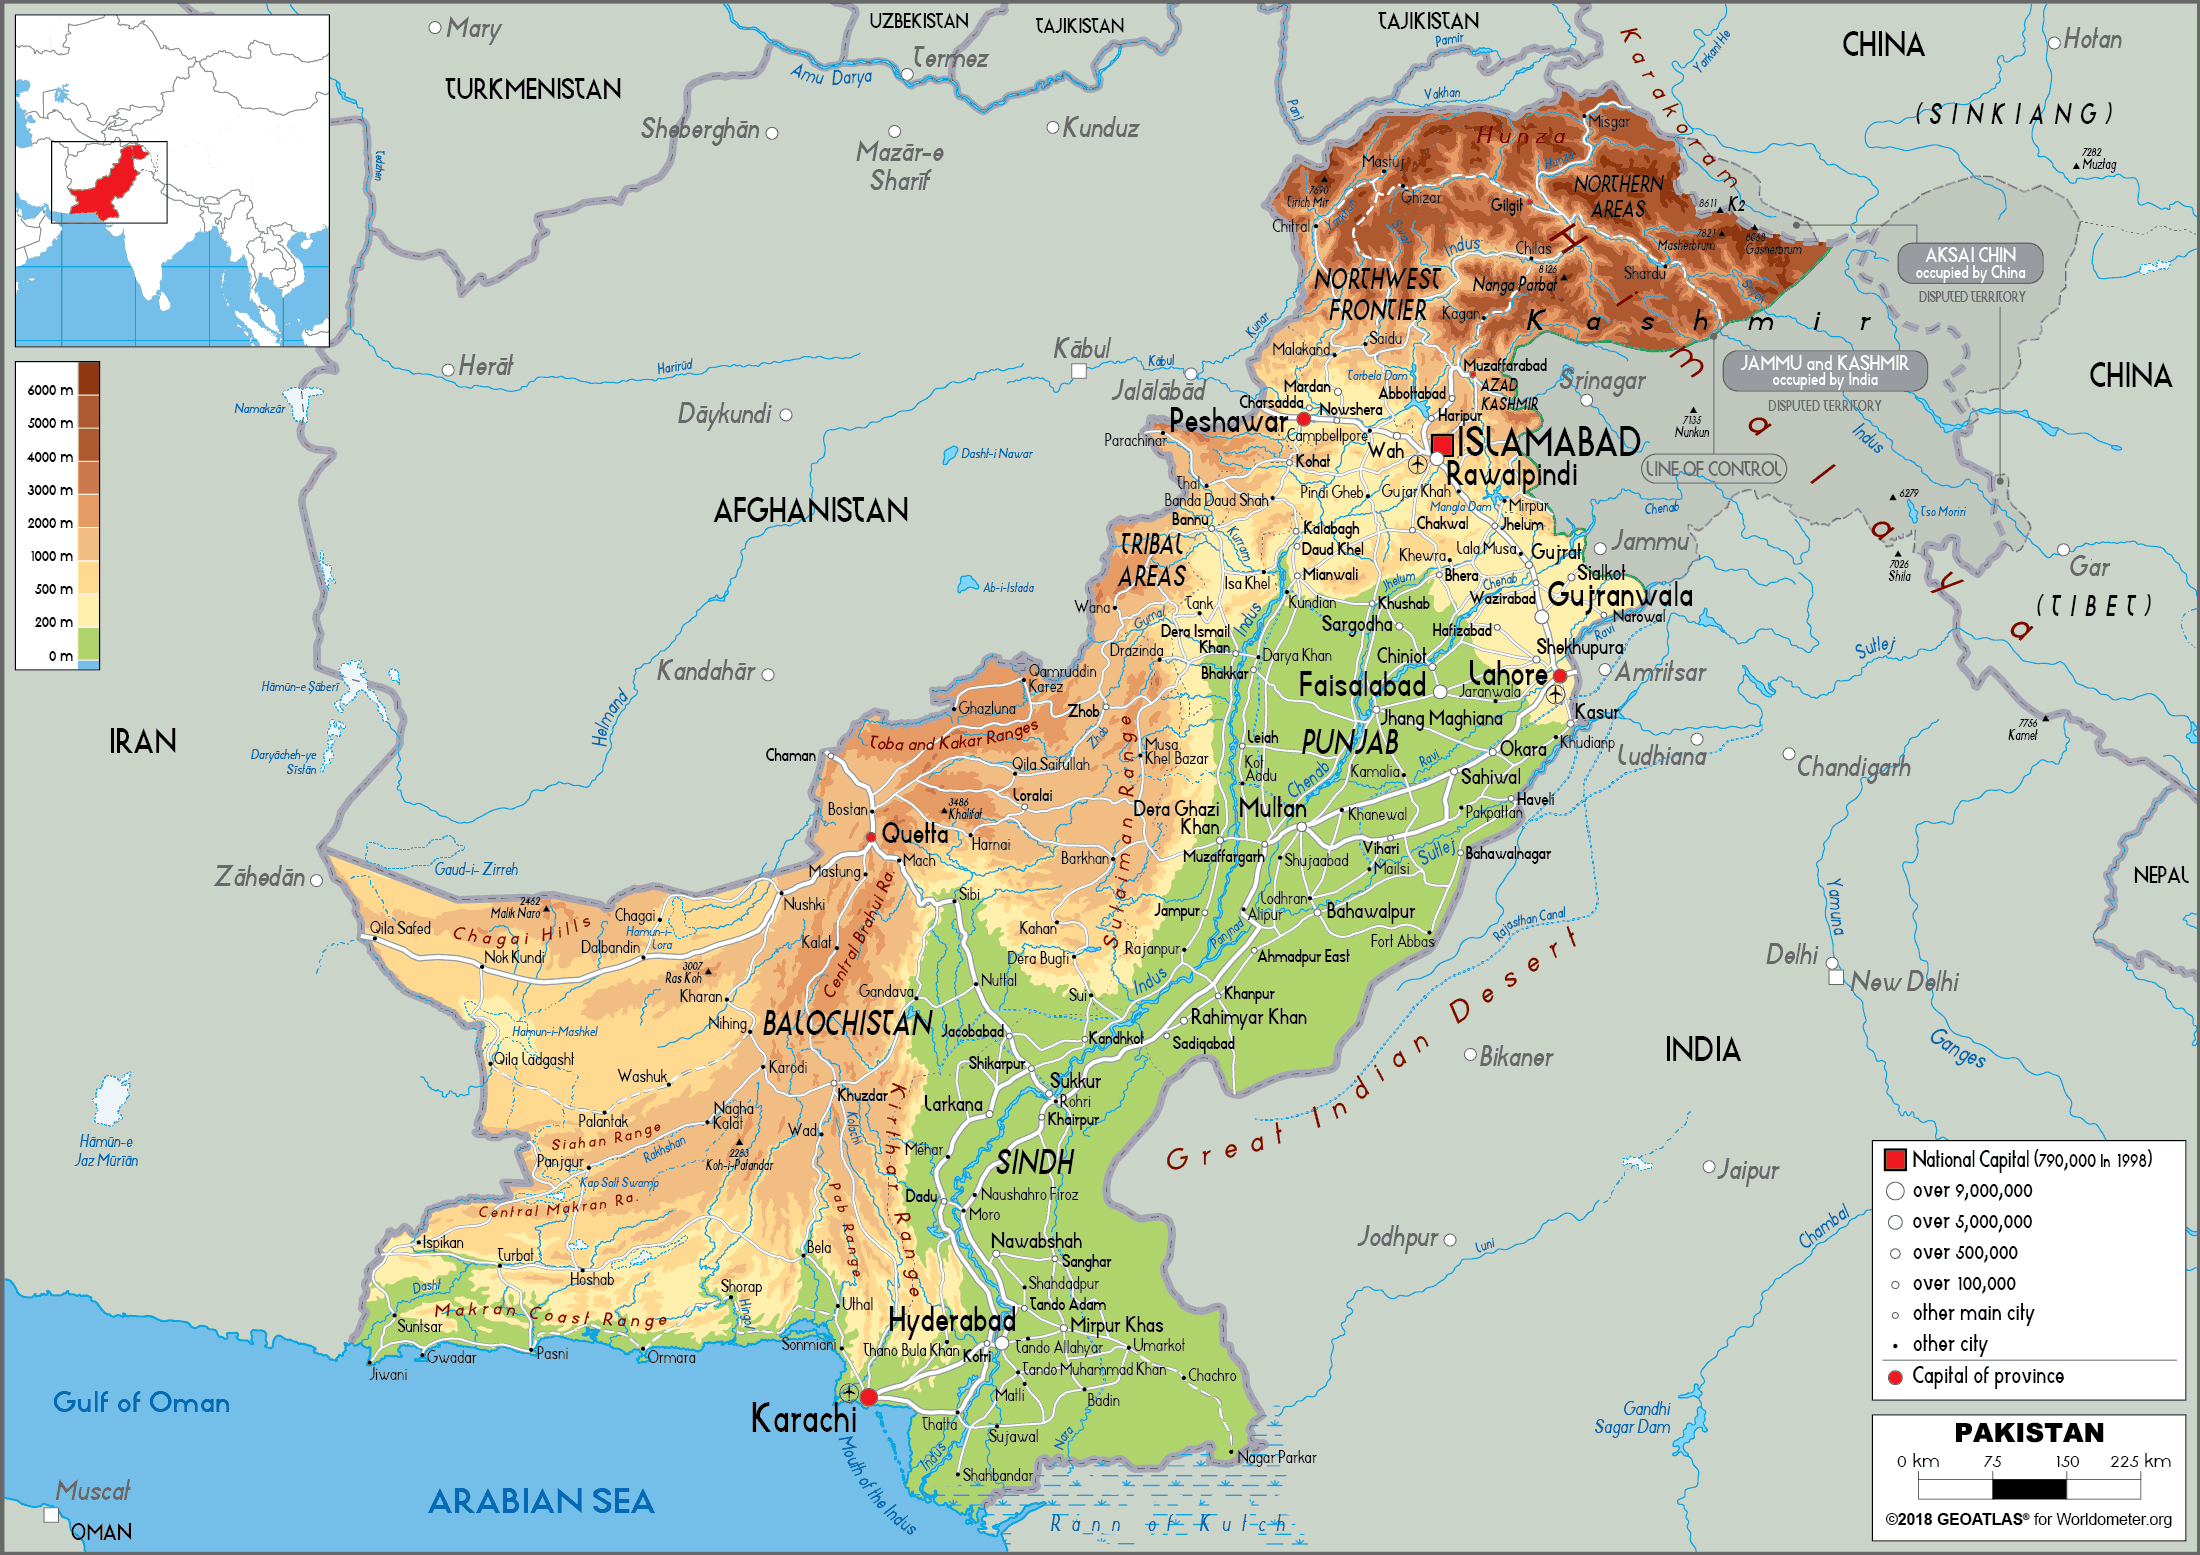 Map of Pakistan Color Coded by Region